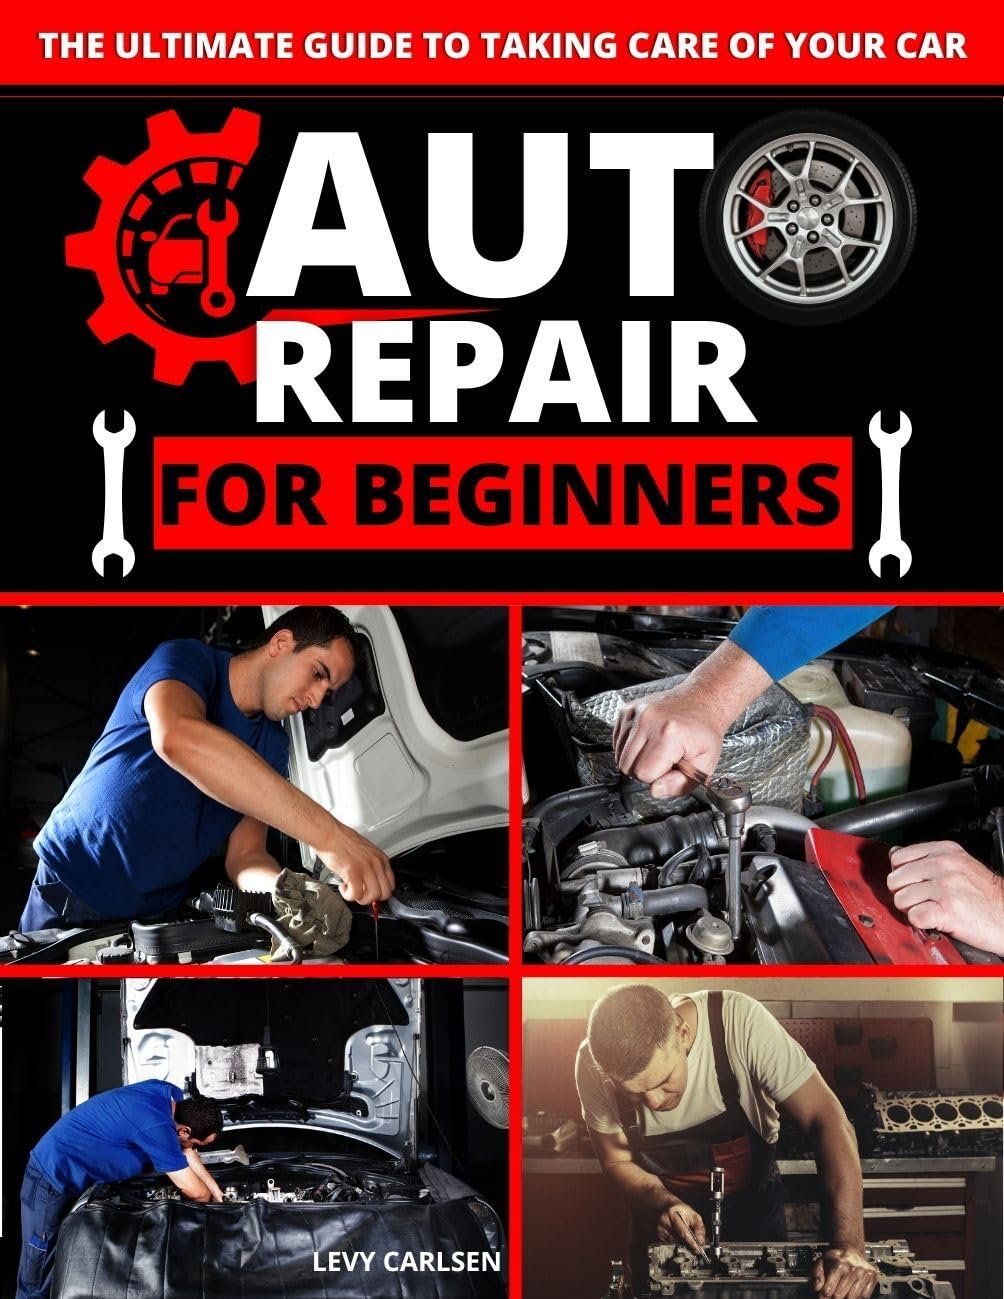 Auto Repair for Beginners Review